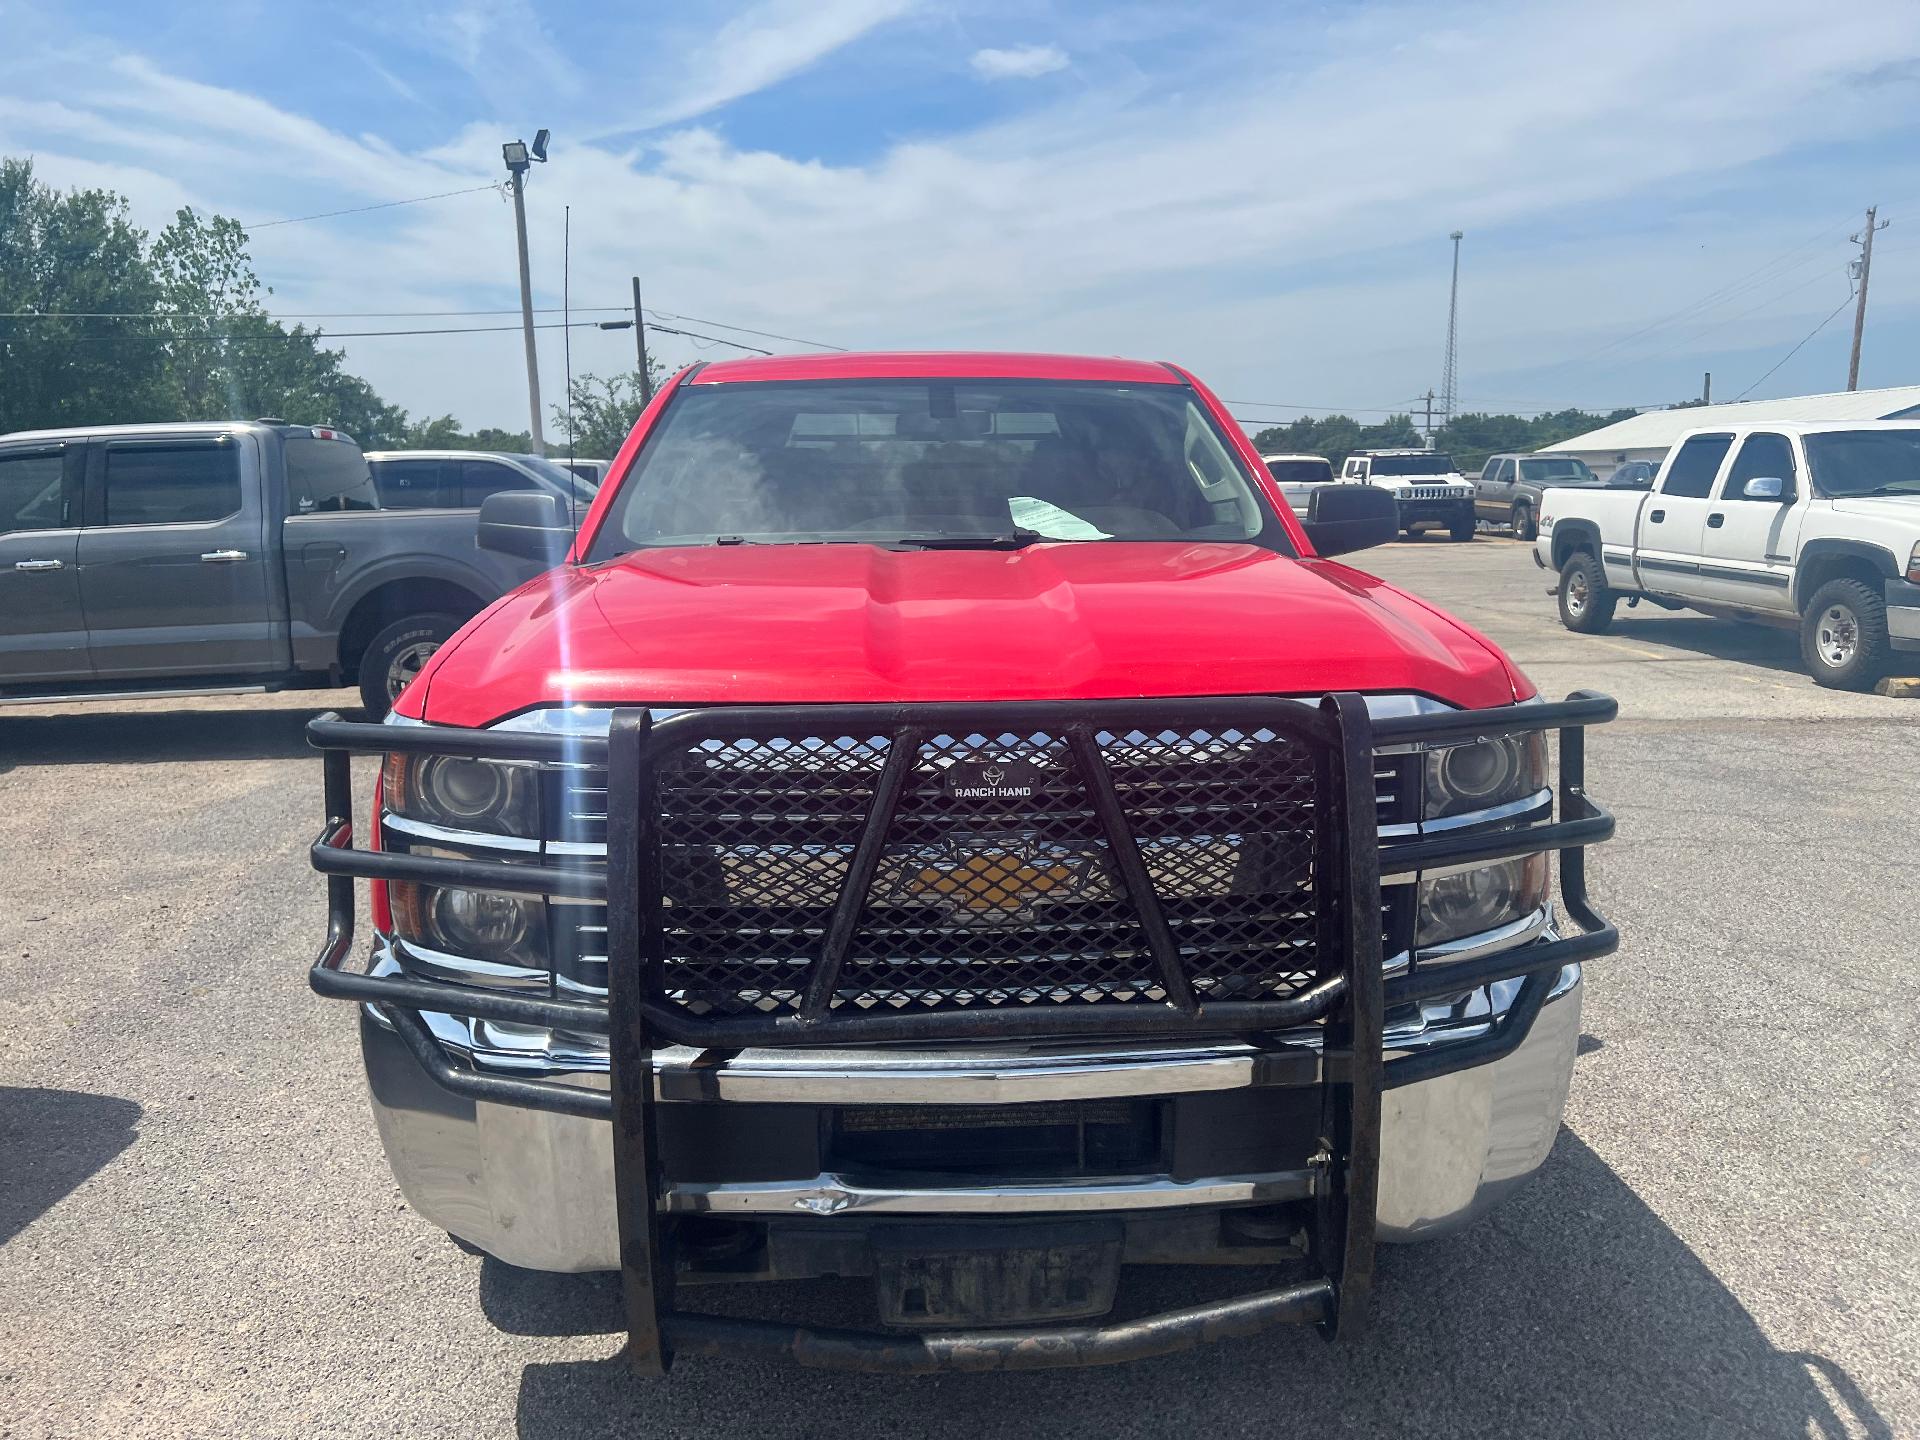 Used 2017 Chevrolet Silverado 2500HD Work Truck with VIN 1GC2KUEG5HZ287763 for sale in Doniphan, MO